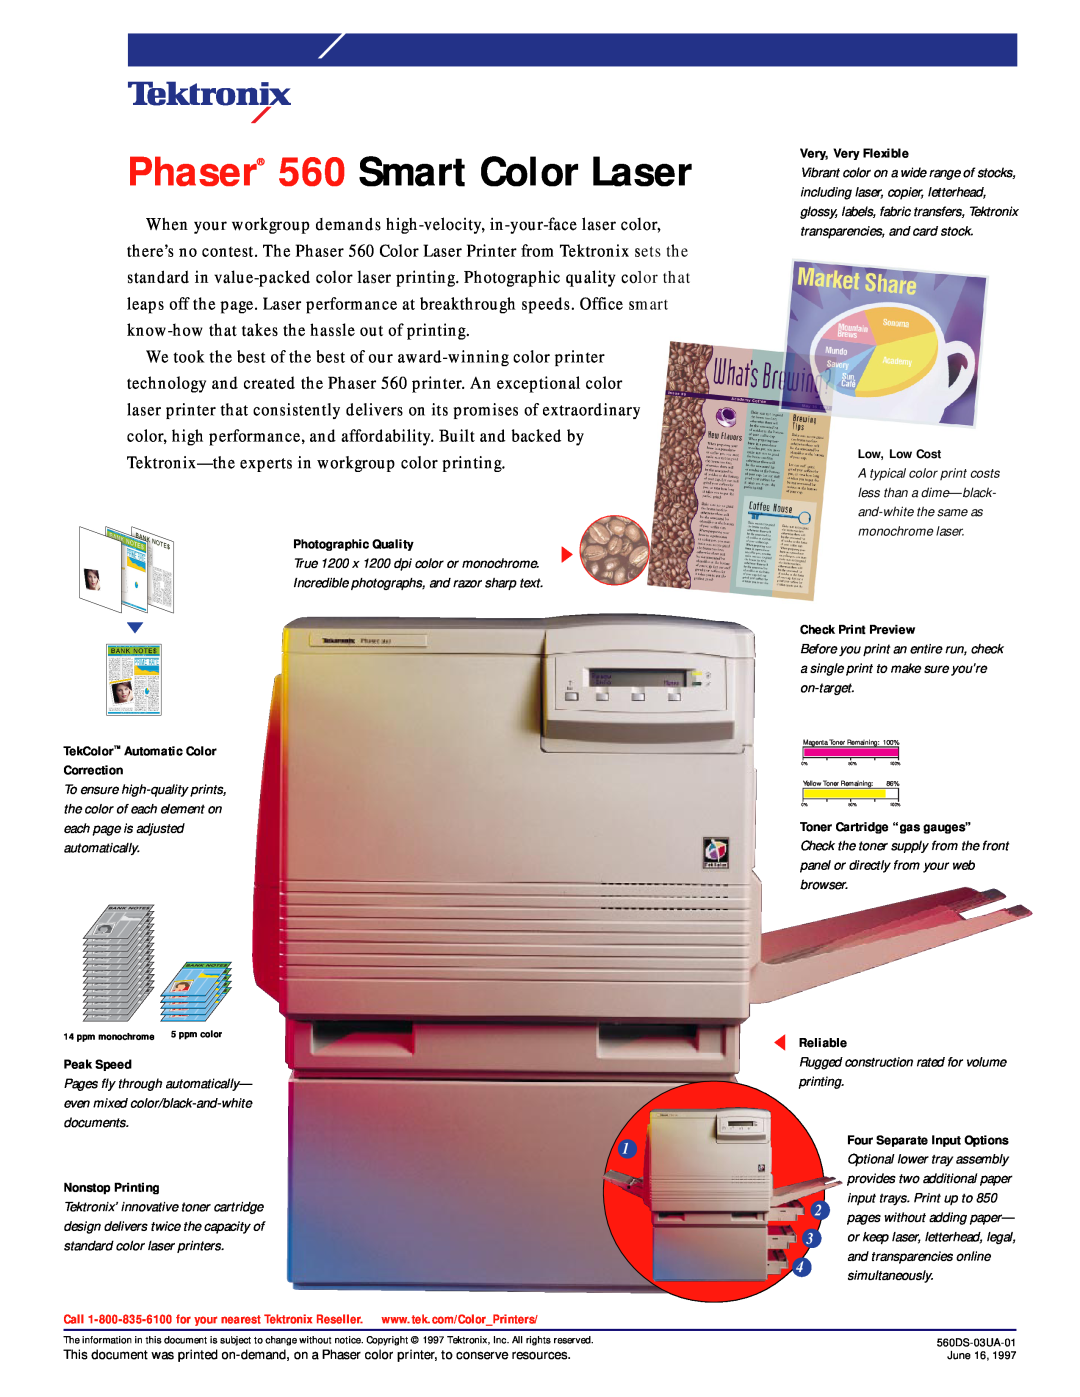 Xerox 550, 560 specifications For use in the US and Canada, Revision 2.0 - Issued December 